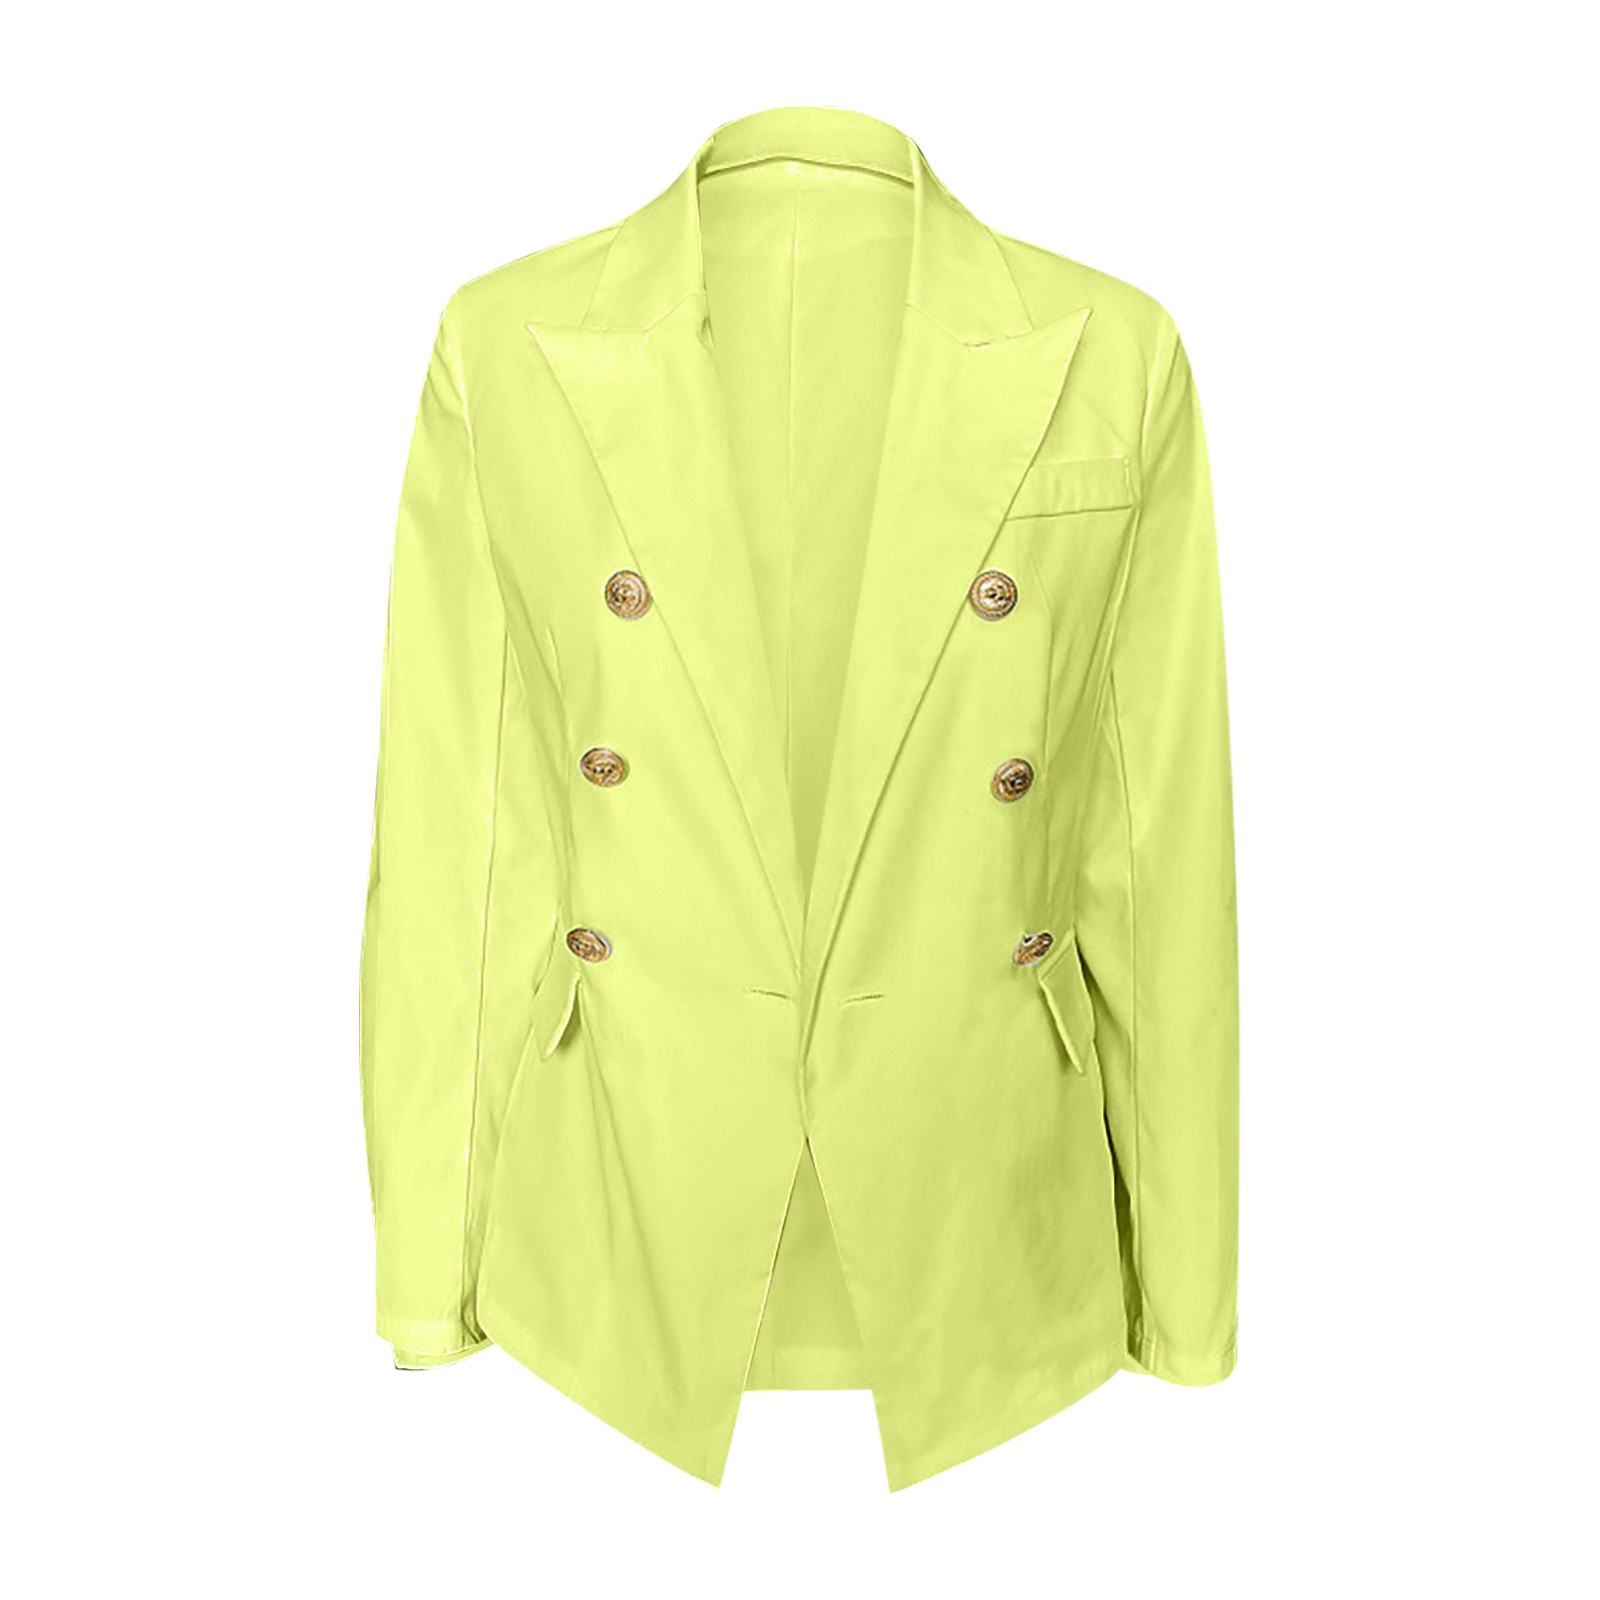 Ichuanyi Women Buttons Long Sleeve Solid Office Coat Cardigans Suit Jacket Long Outwear - image 4 of 6